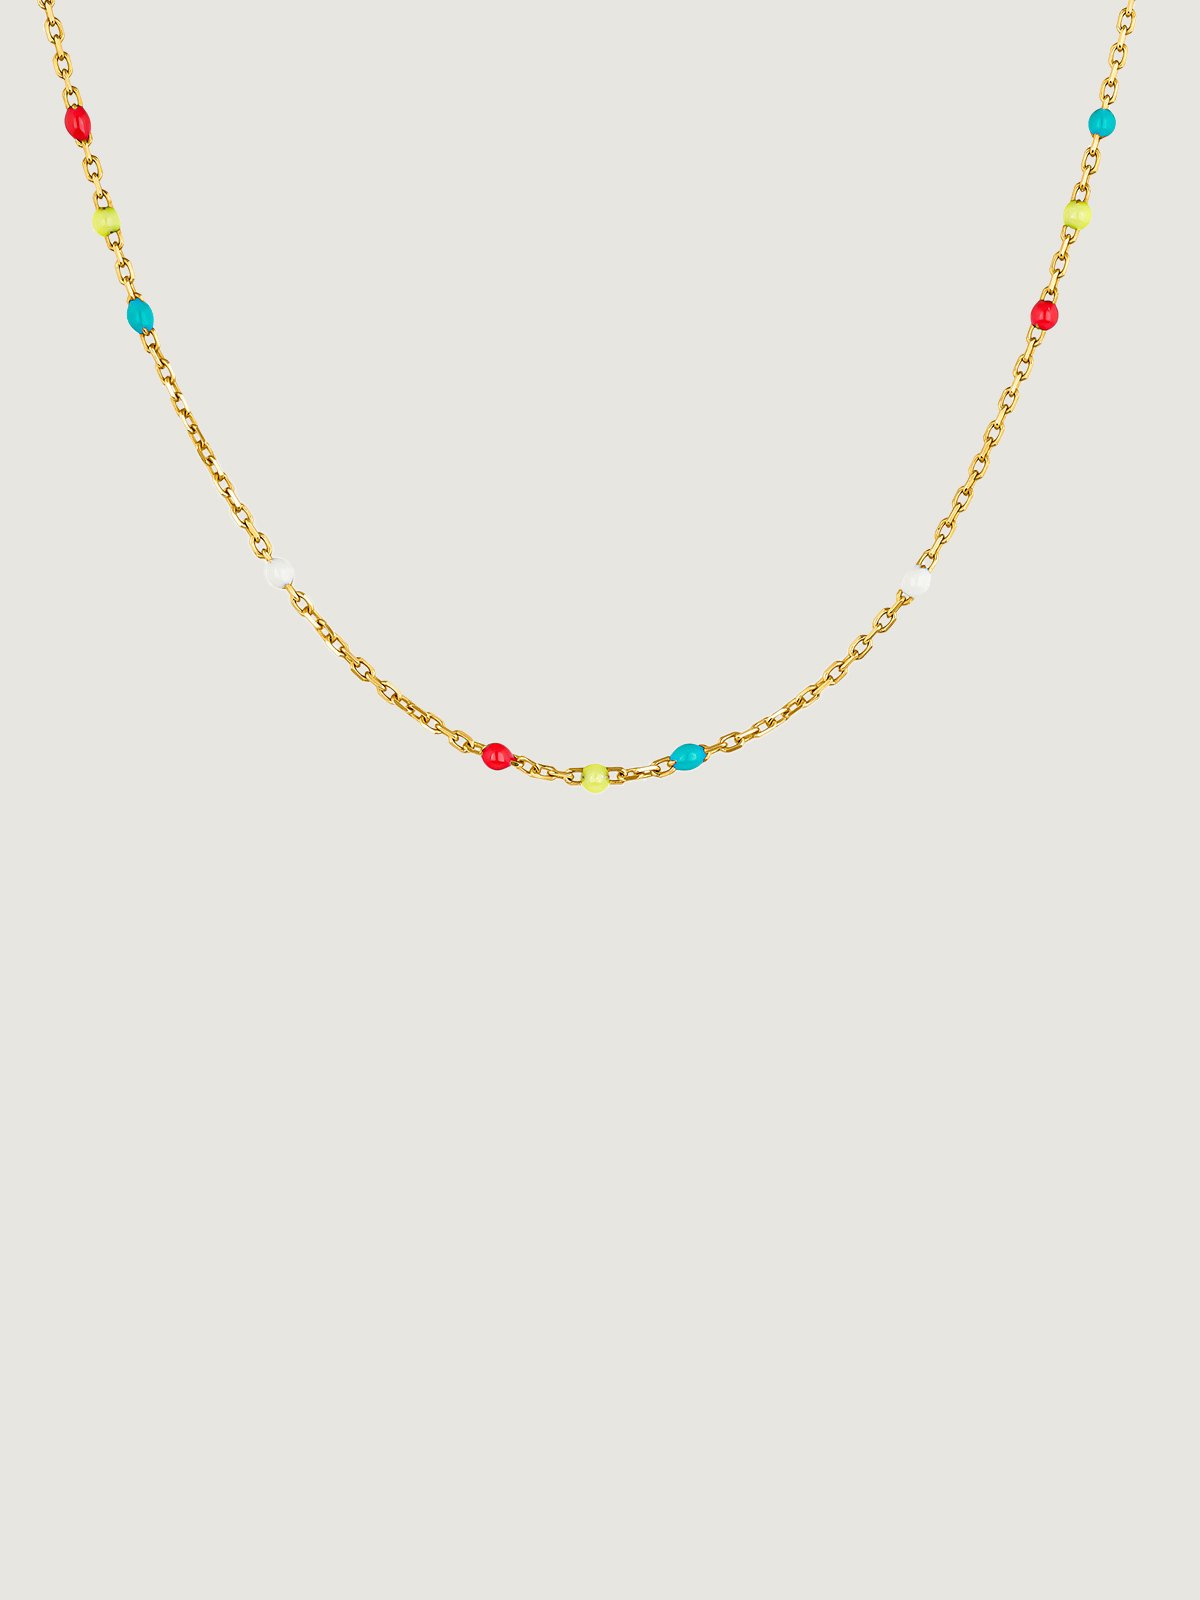 925 Silver chain dipped in 18K yellow gold with multicolor enamel.